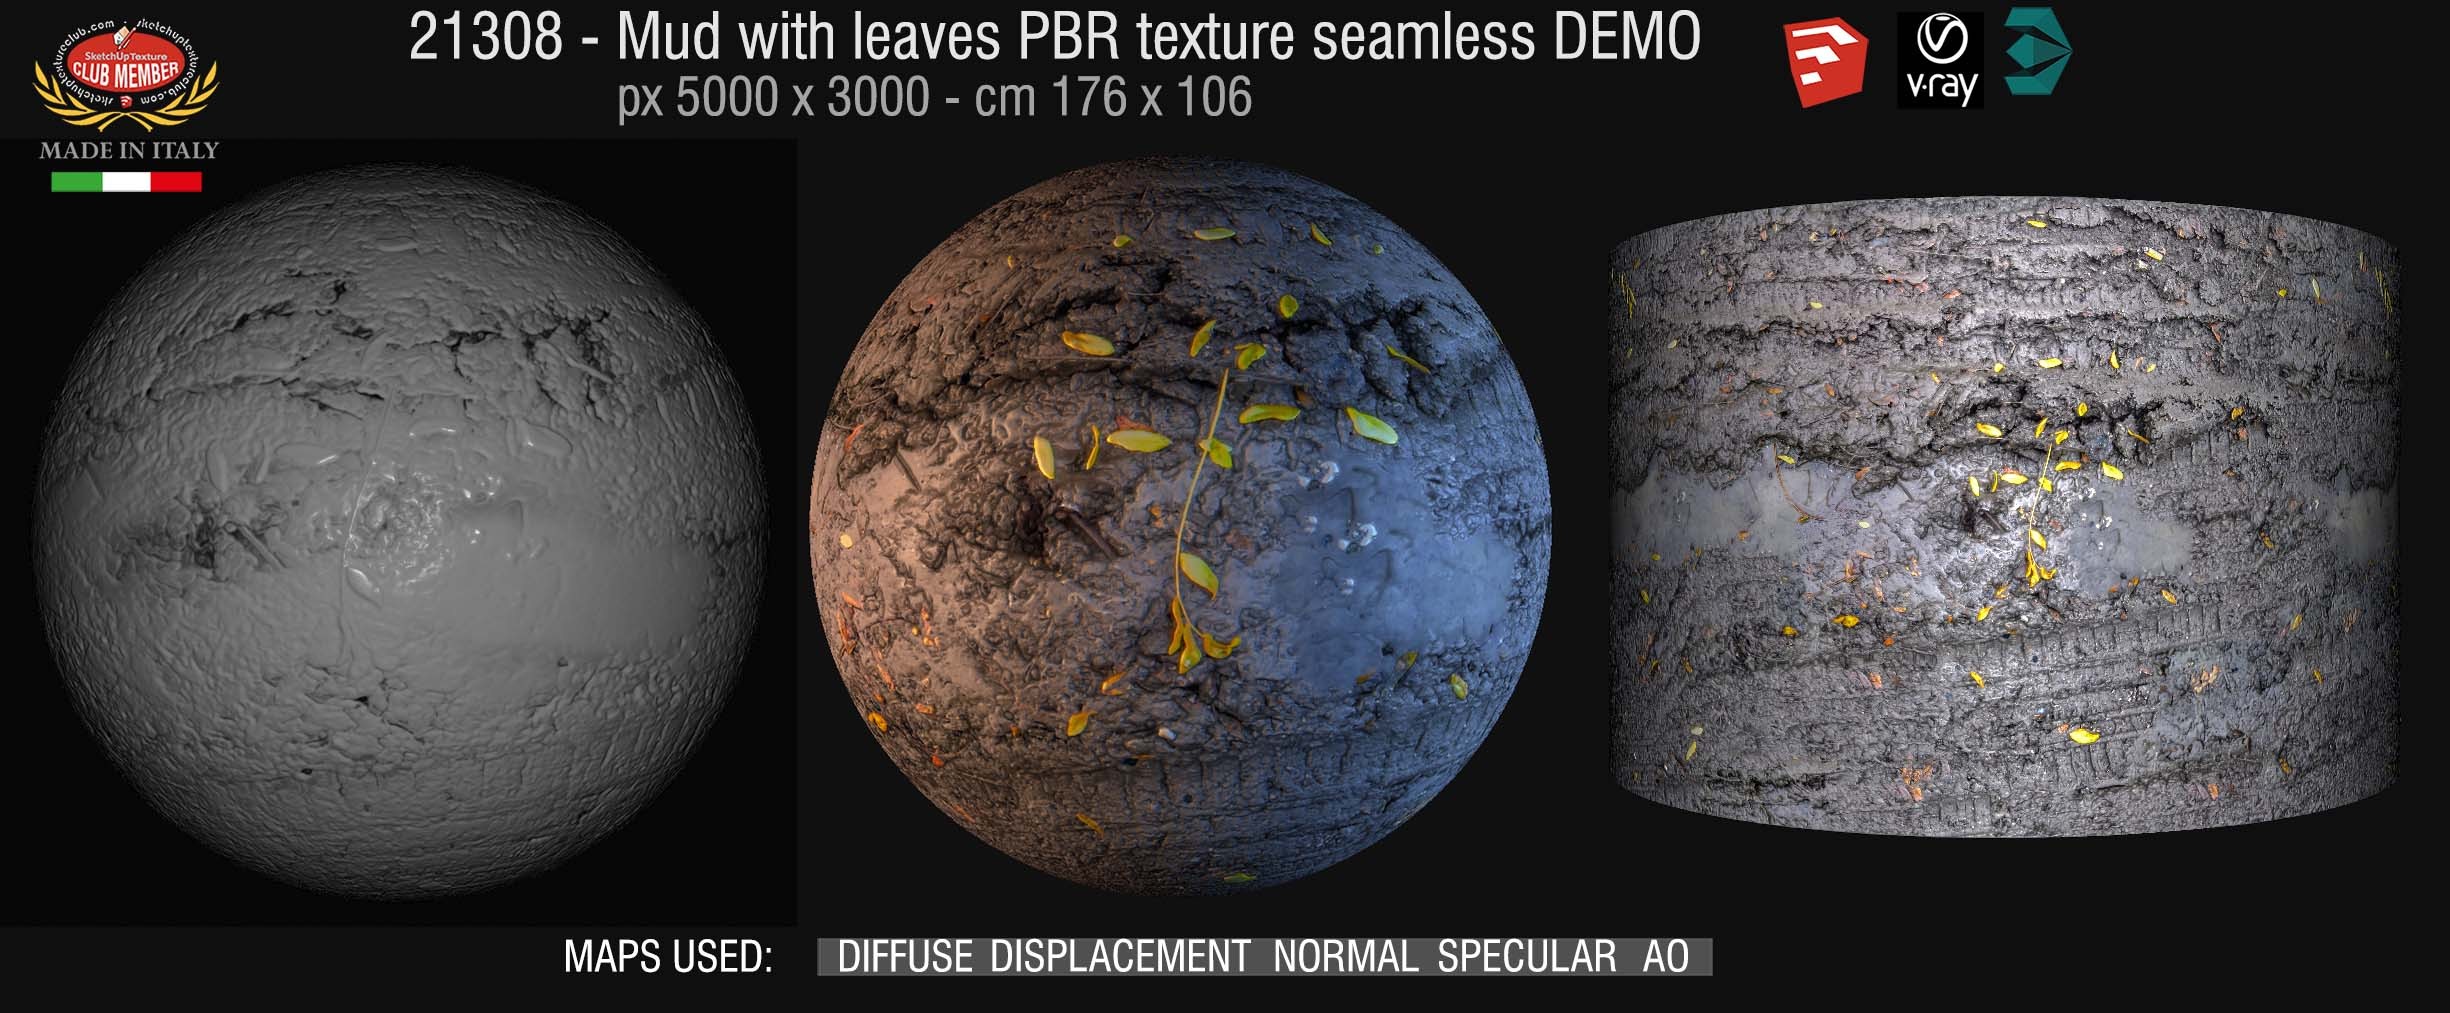 21238 Mud with leaves PBR texture seamless DEMO